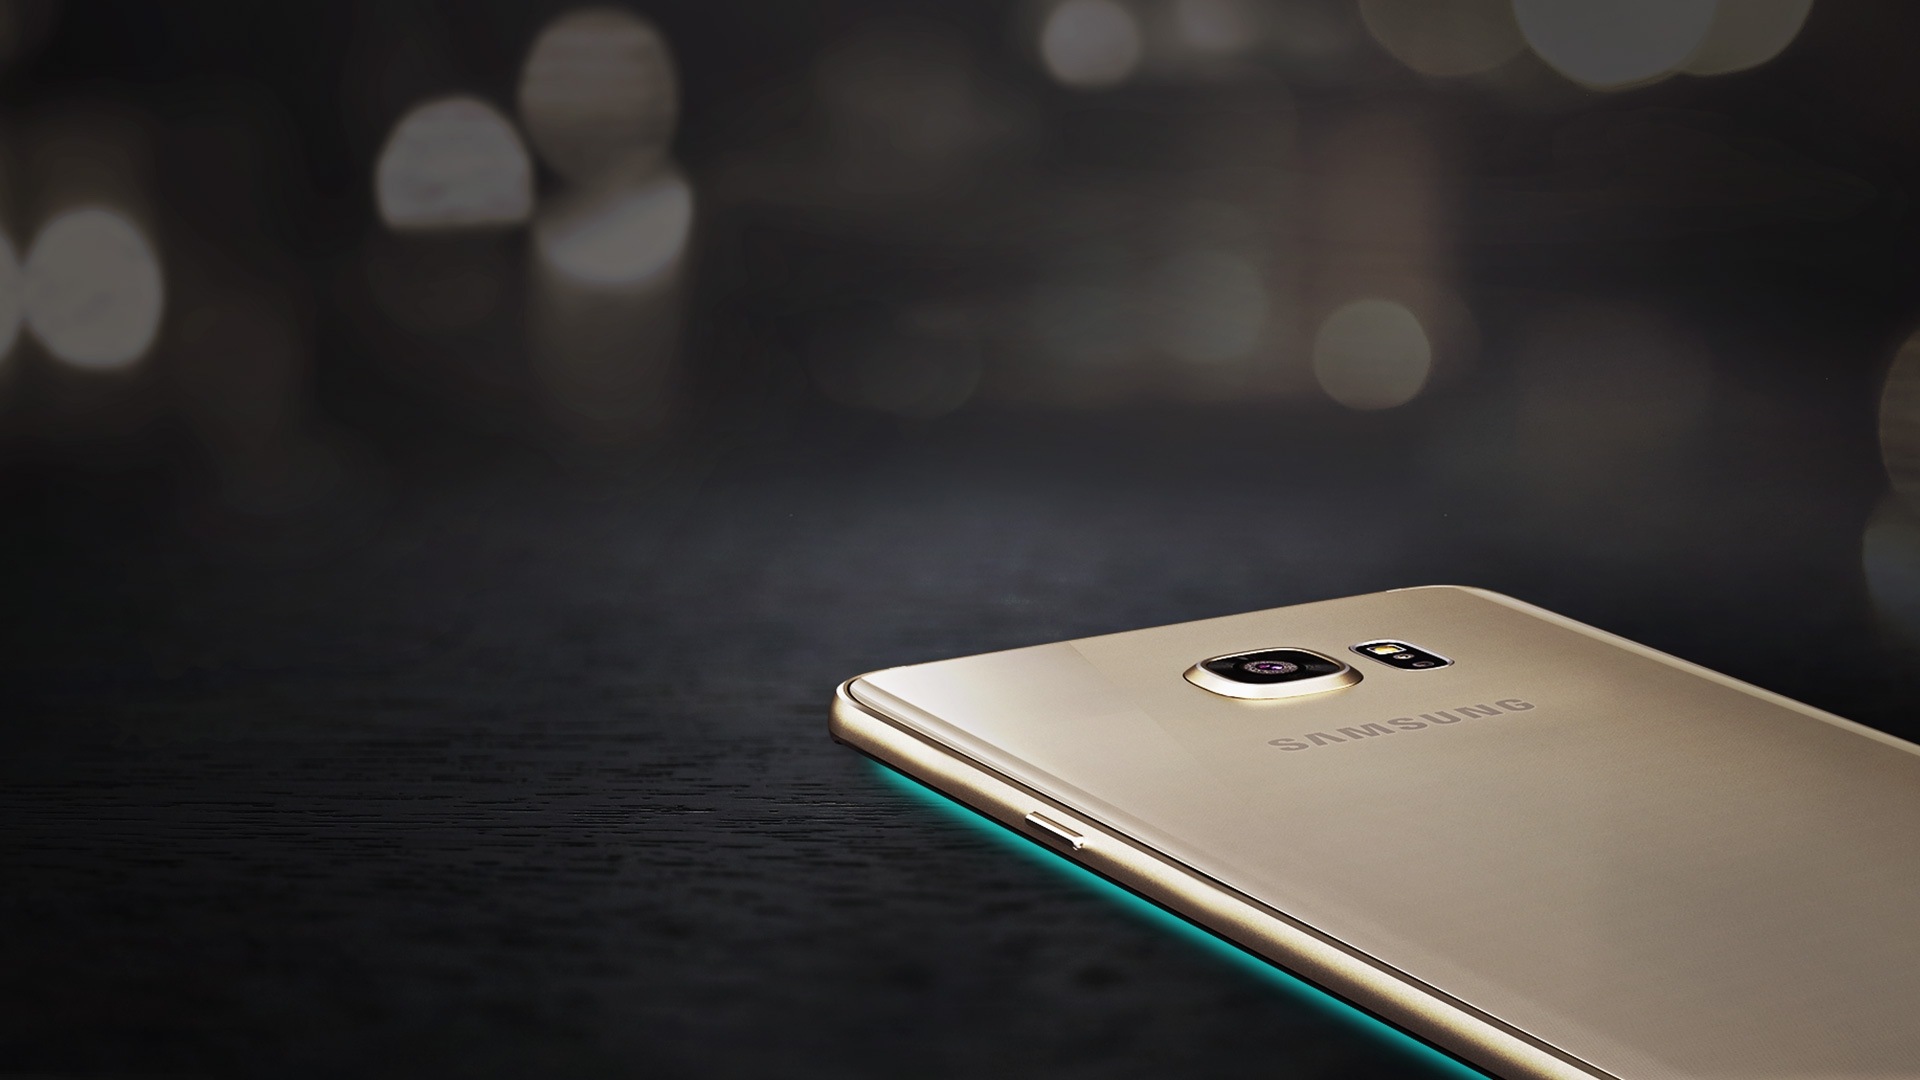 A page with links to a range of videos on the Galaxy S6 edge+